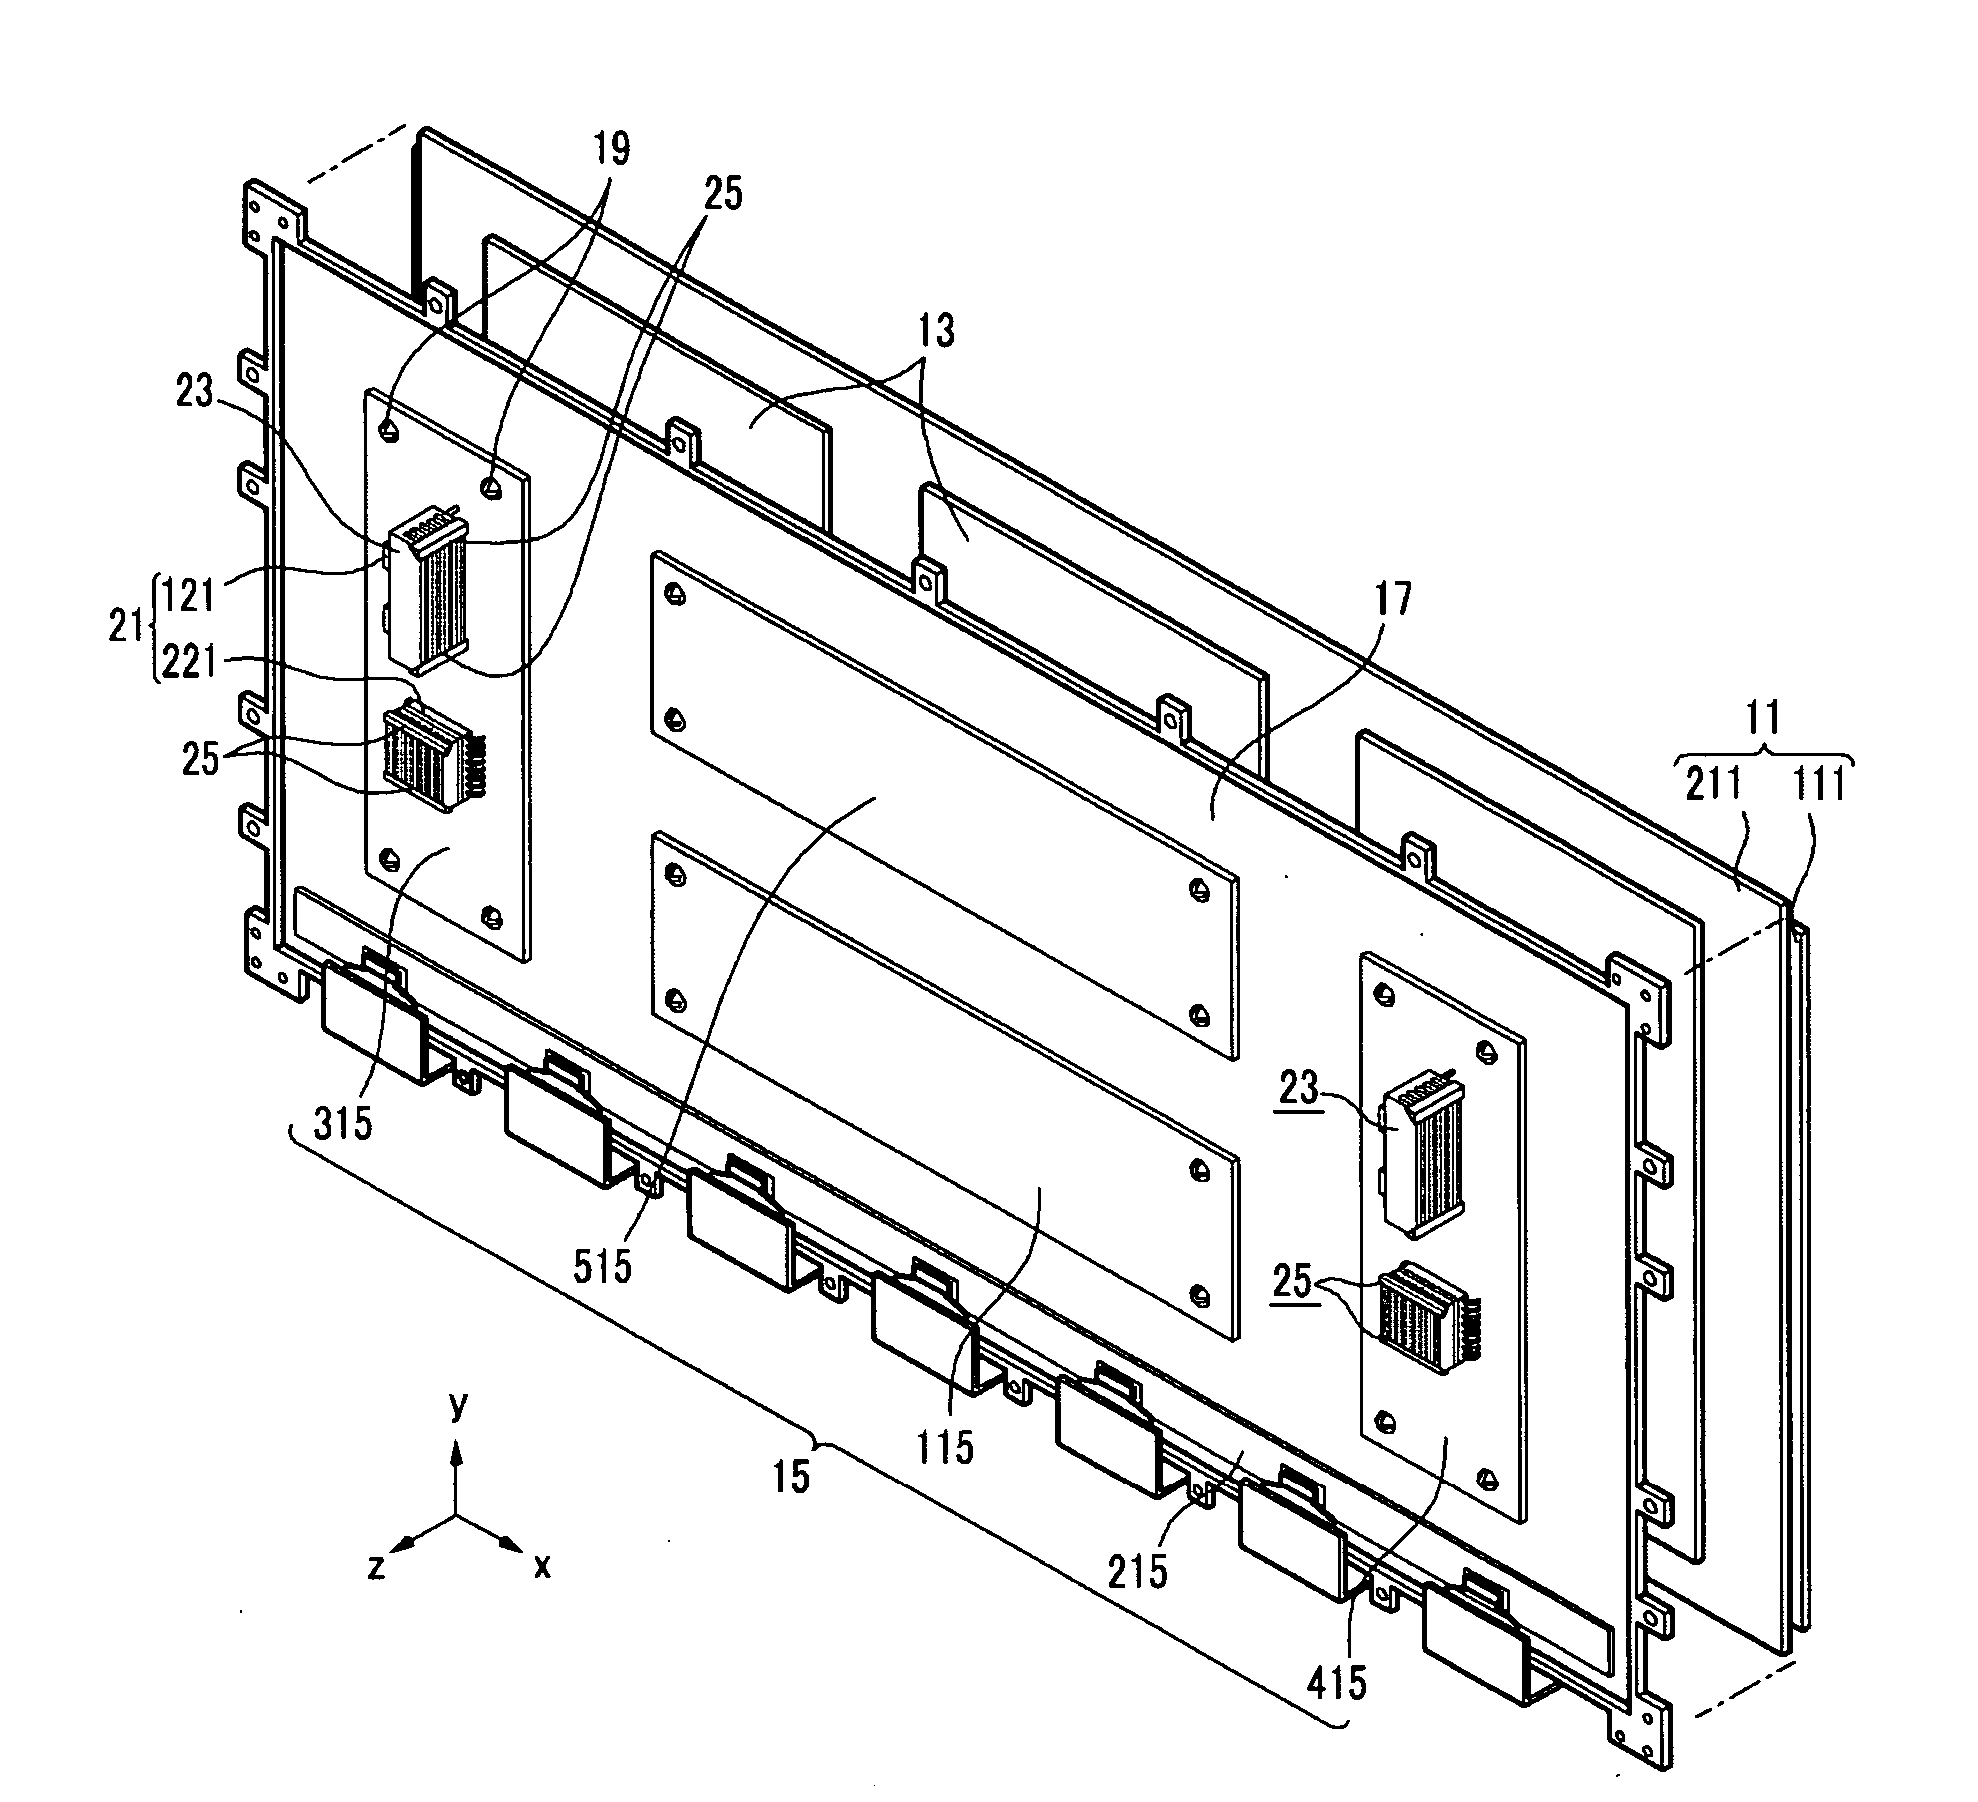 Plasma display device with heat sink noise reducer